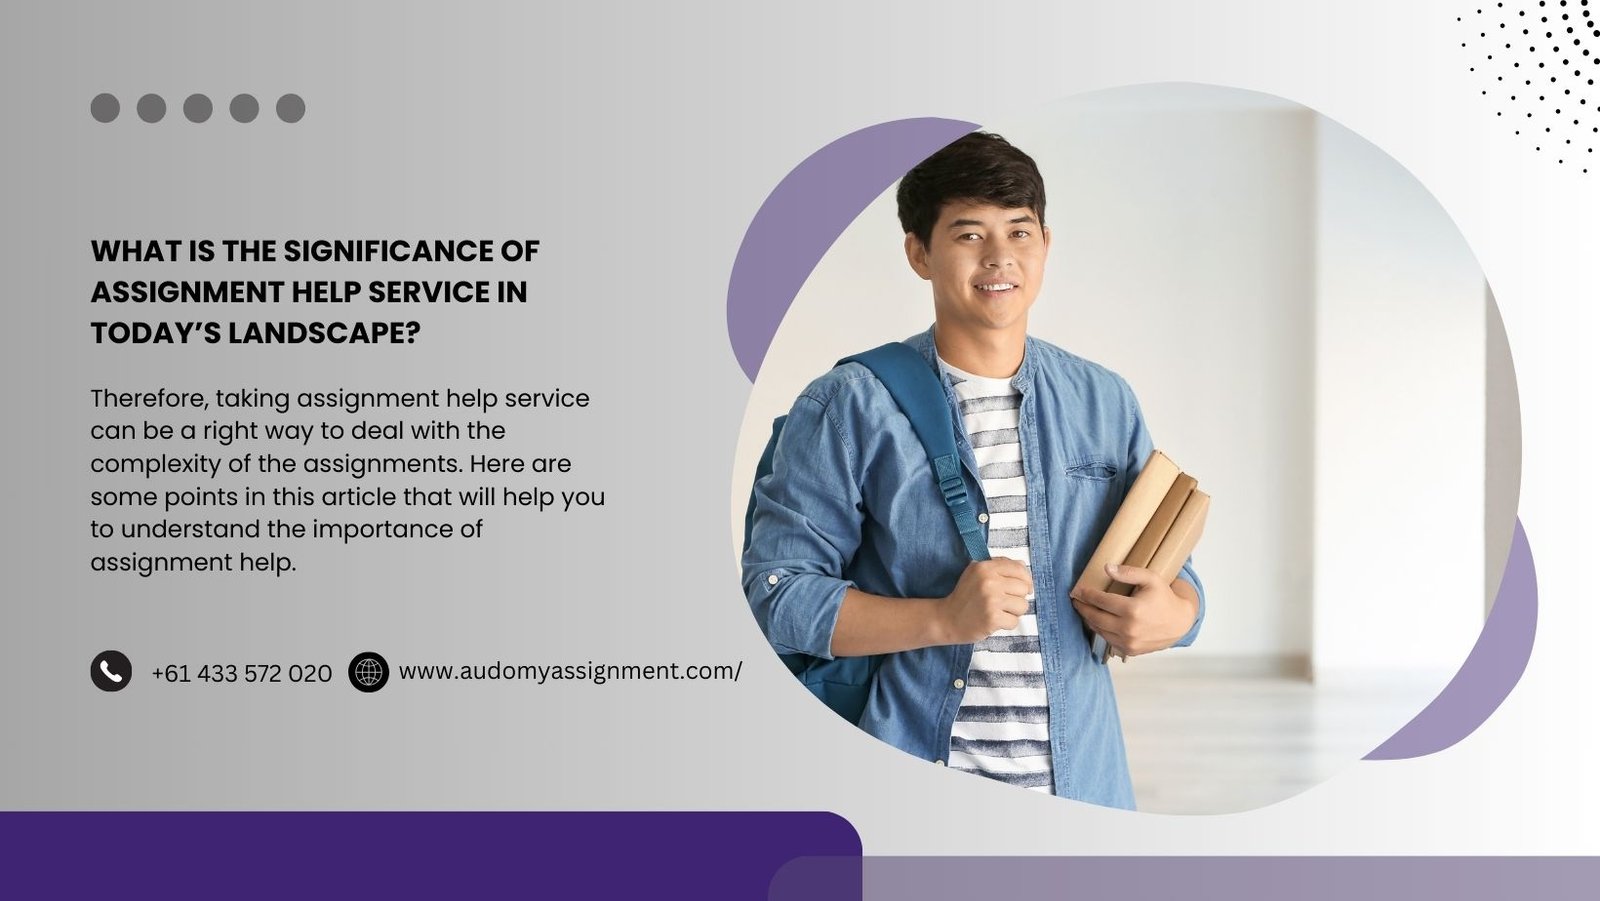 What Is the Significance of Assignment Help Service In Today’s Landscape?